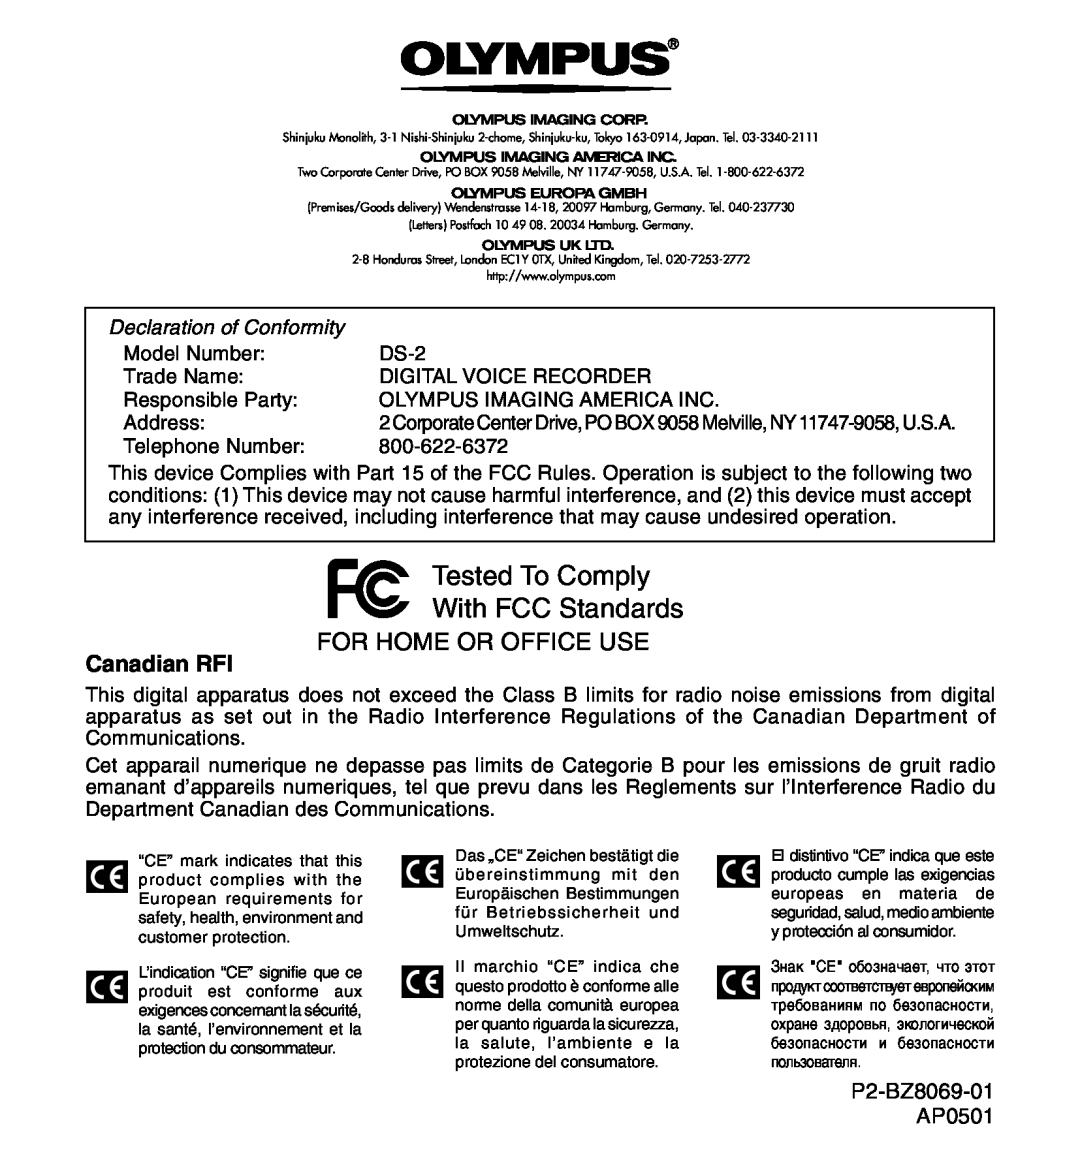 Olympus For Home Or Office Use, Tested To Comply With FCC Standards, Declaration of Conformity, Model Number, DS-2 